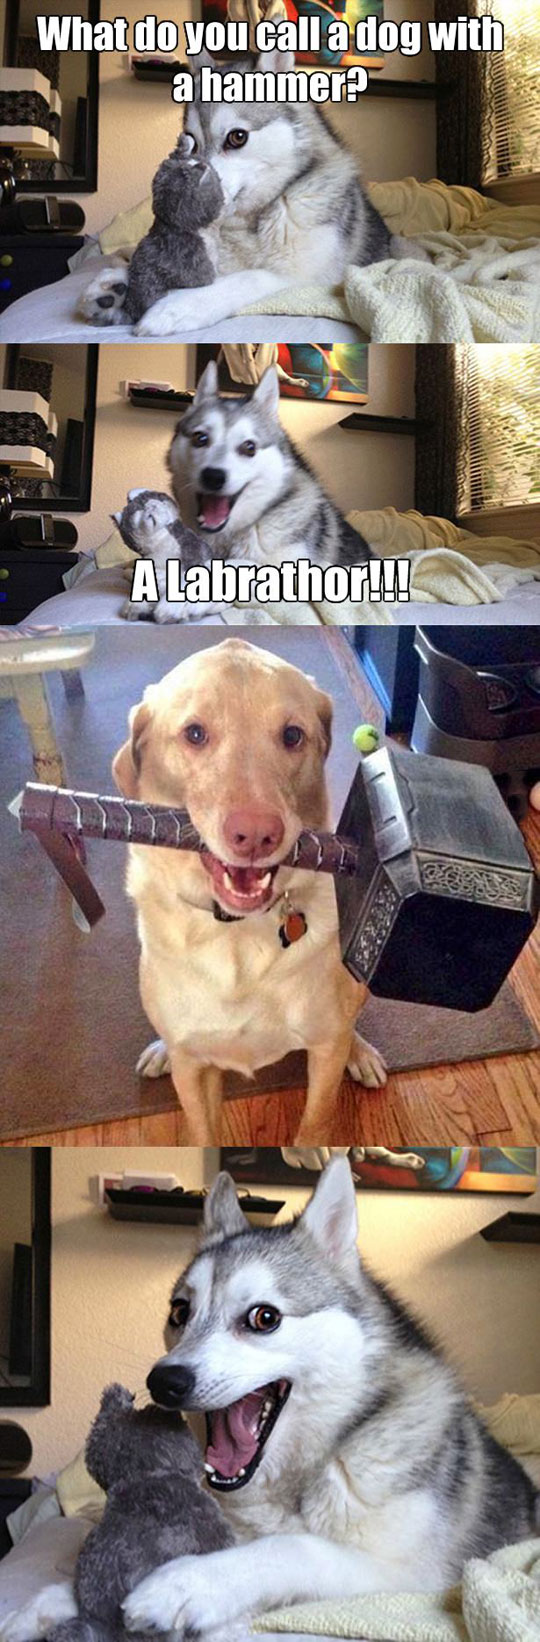 Dog With A Hammer | Funny As Duck